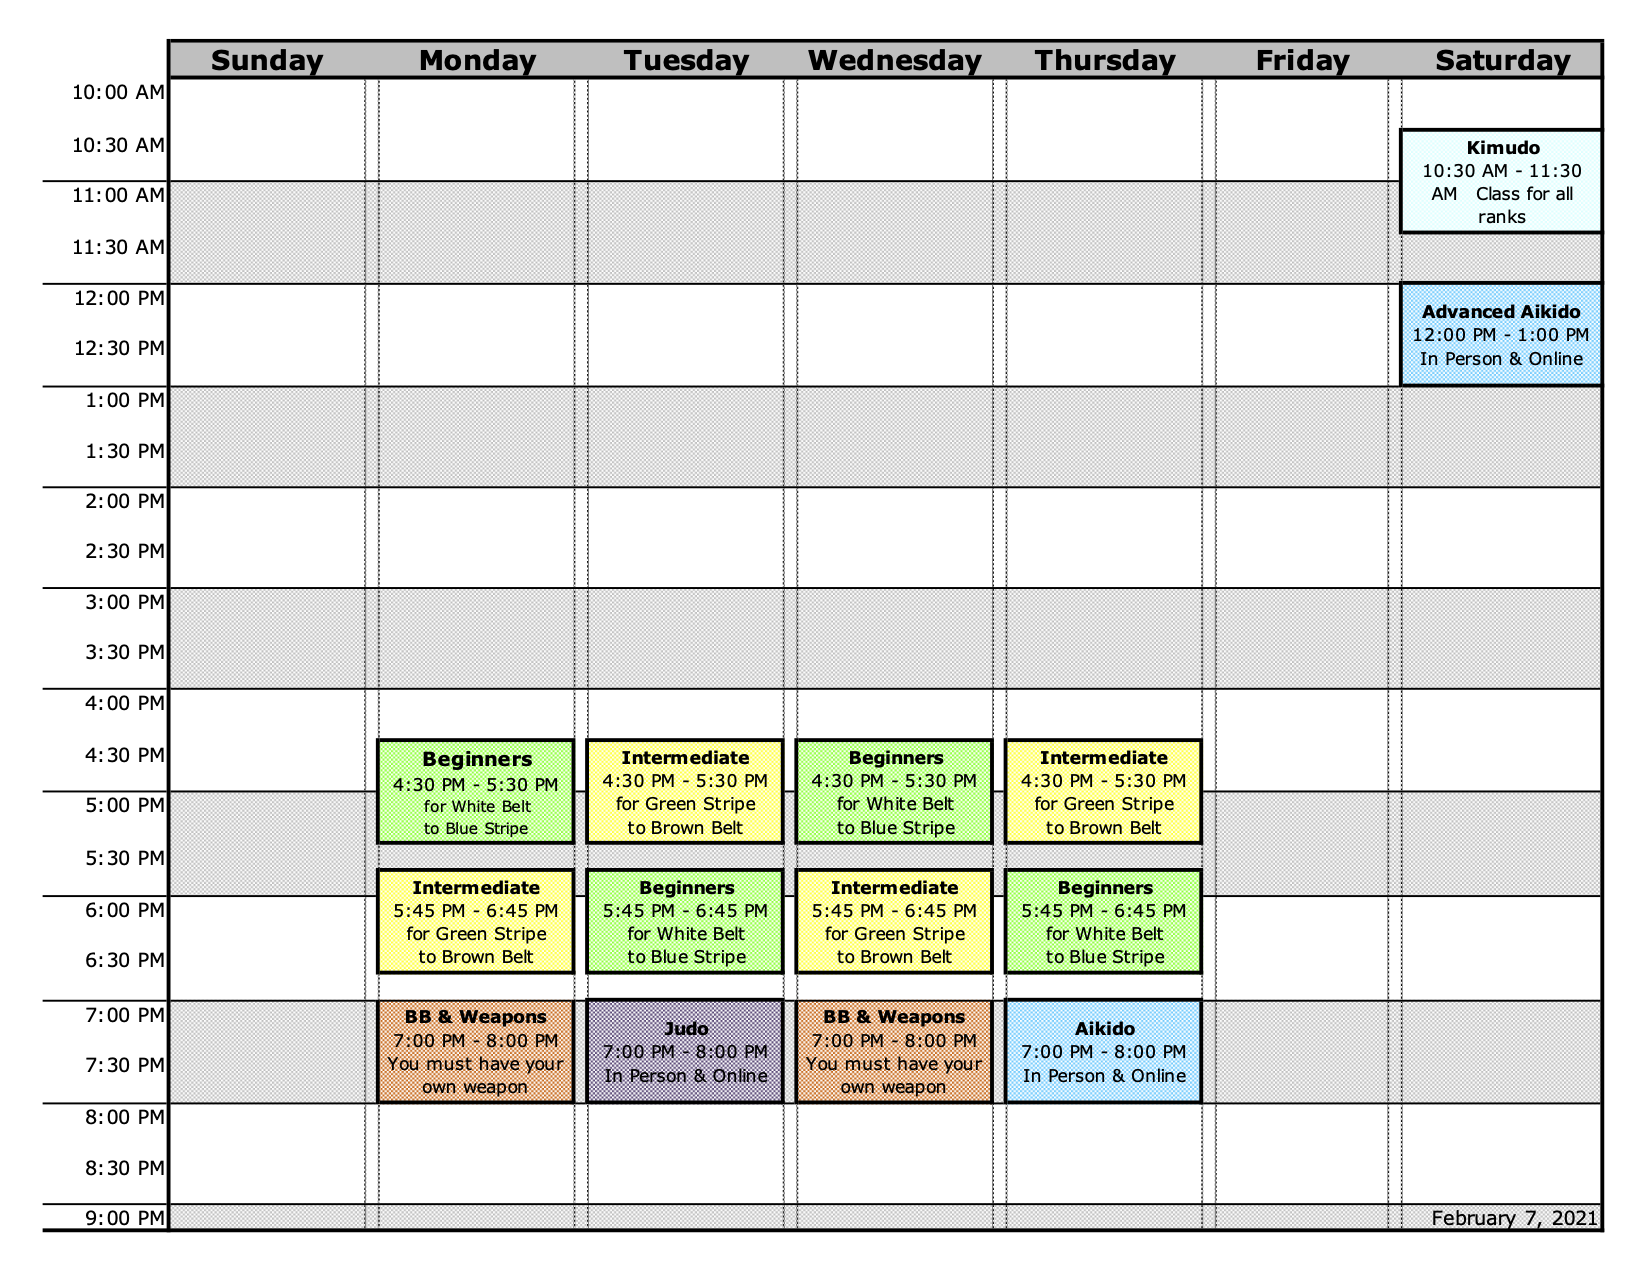 Updated Covid Schedule for Students